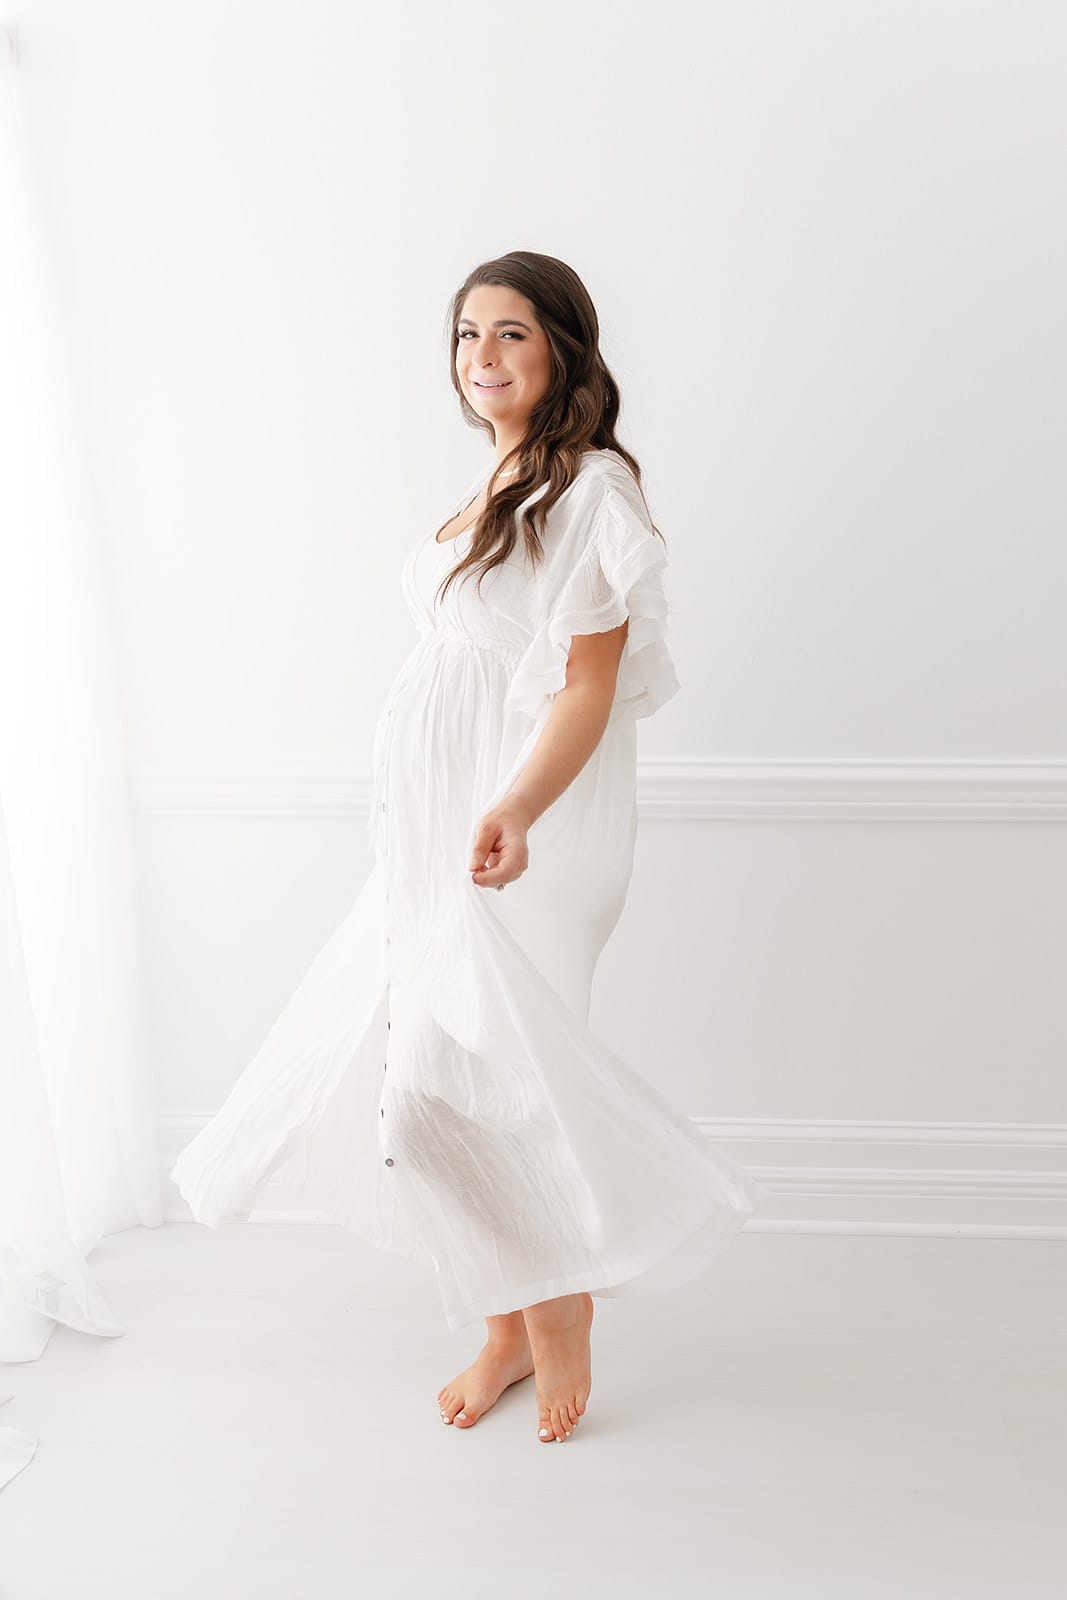 A Pensacola maternity photographer captures a pregnant woman in a white dress posing elegantly in front of a white wall.